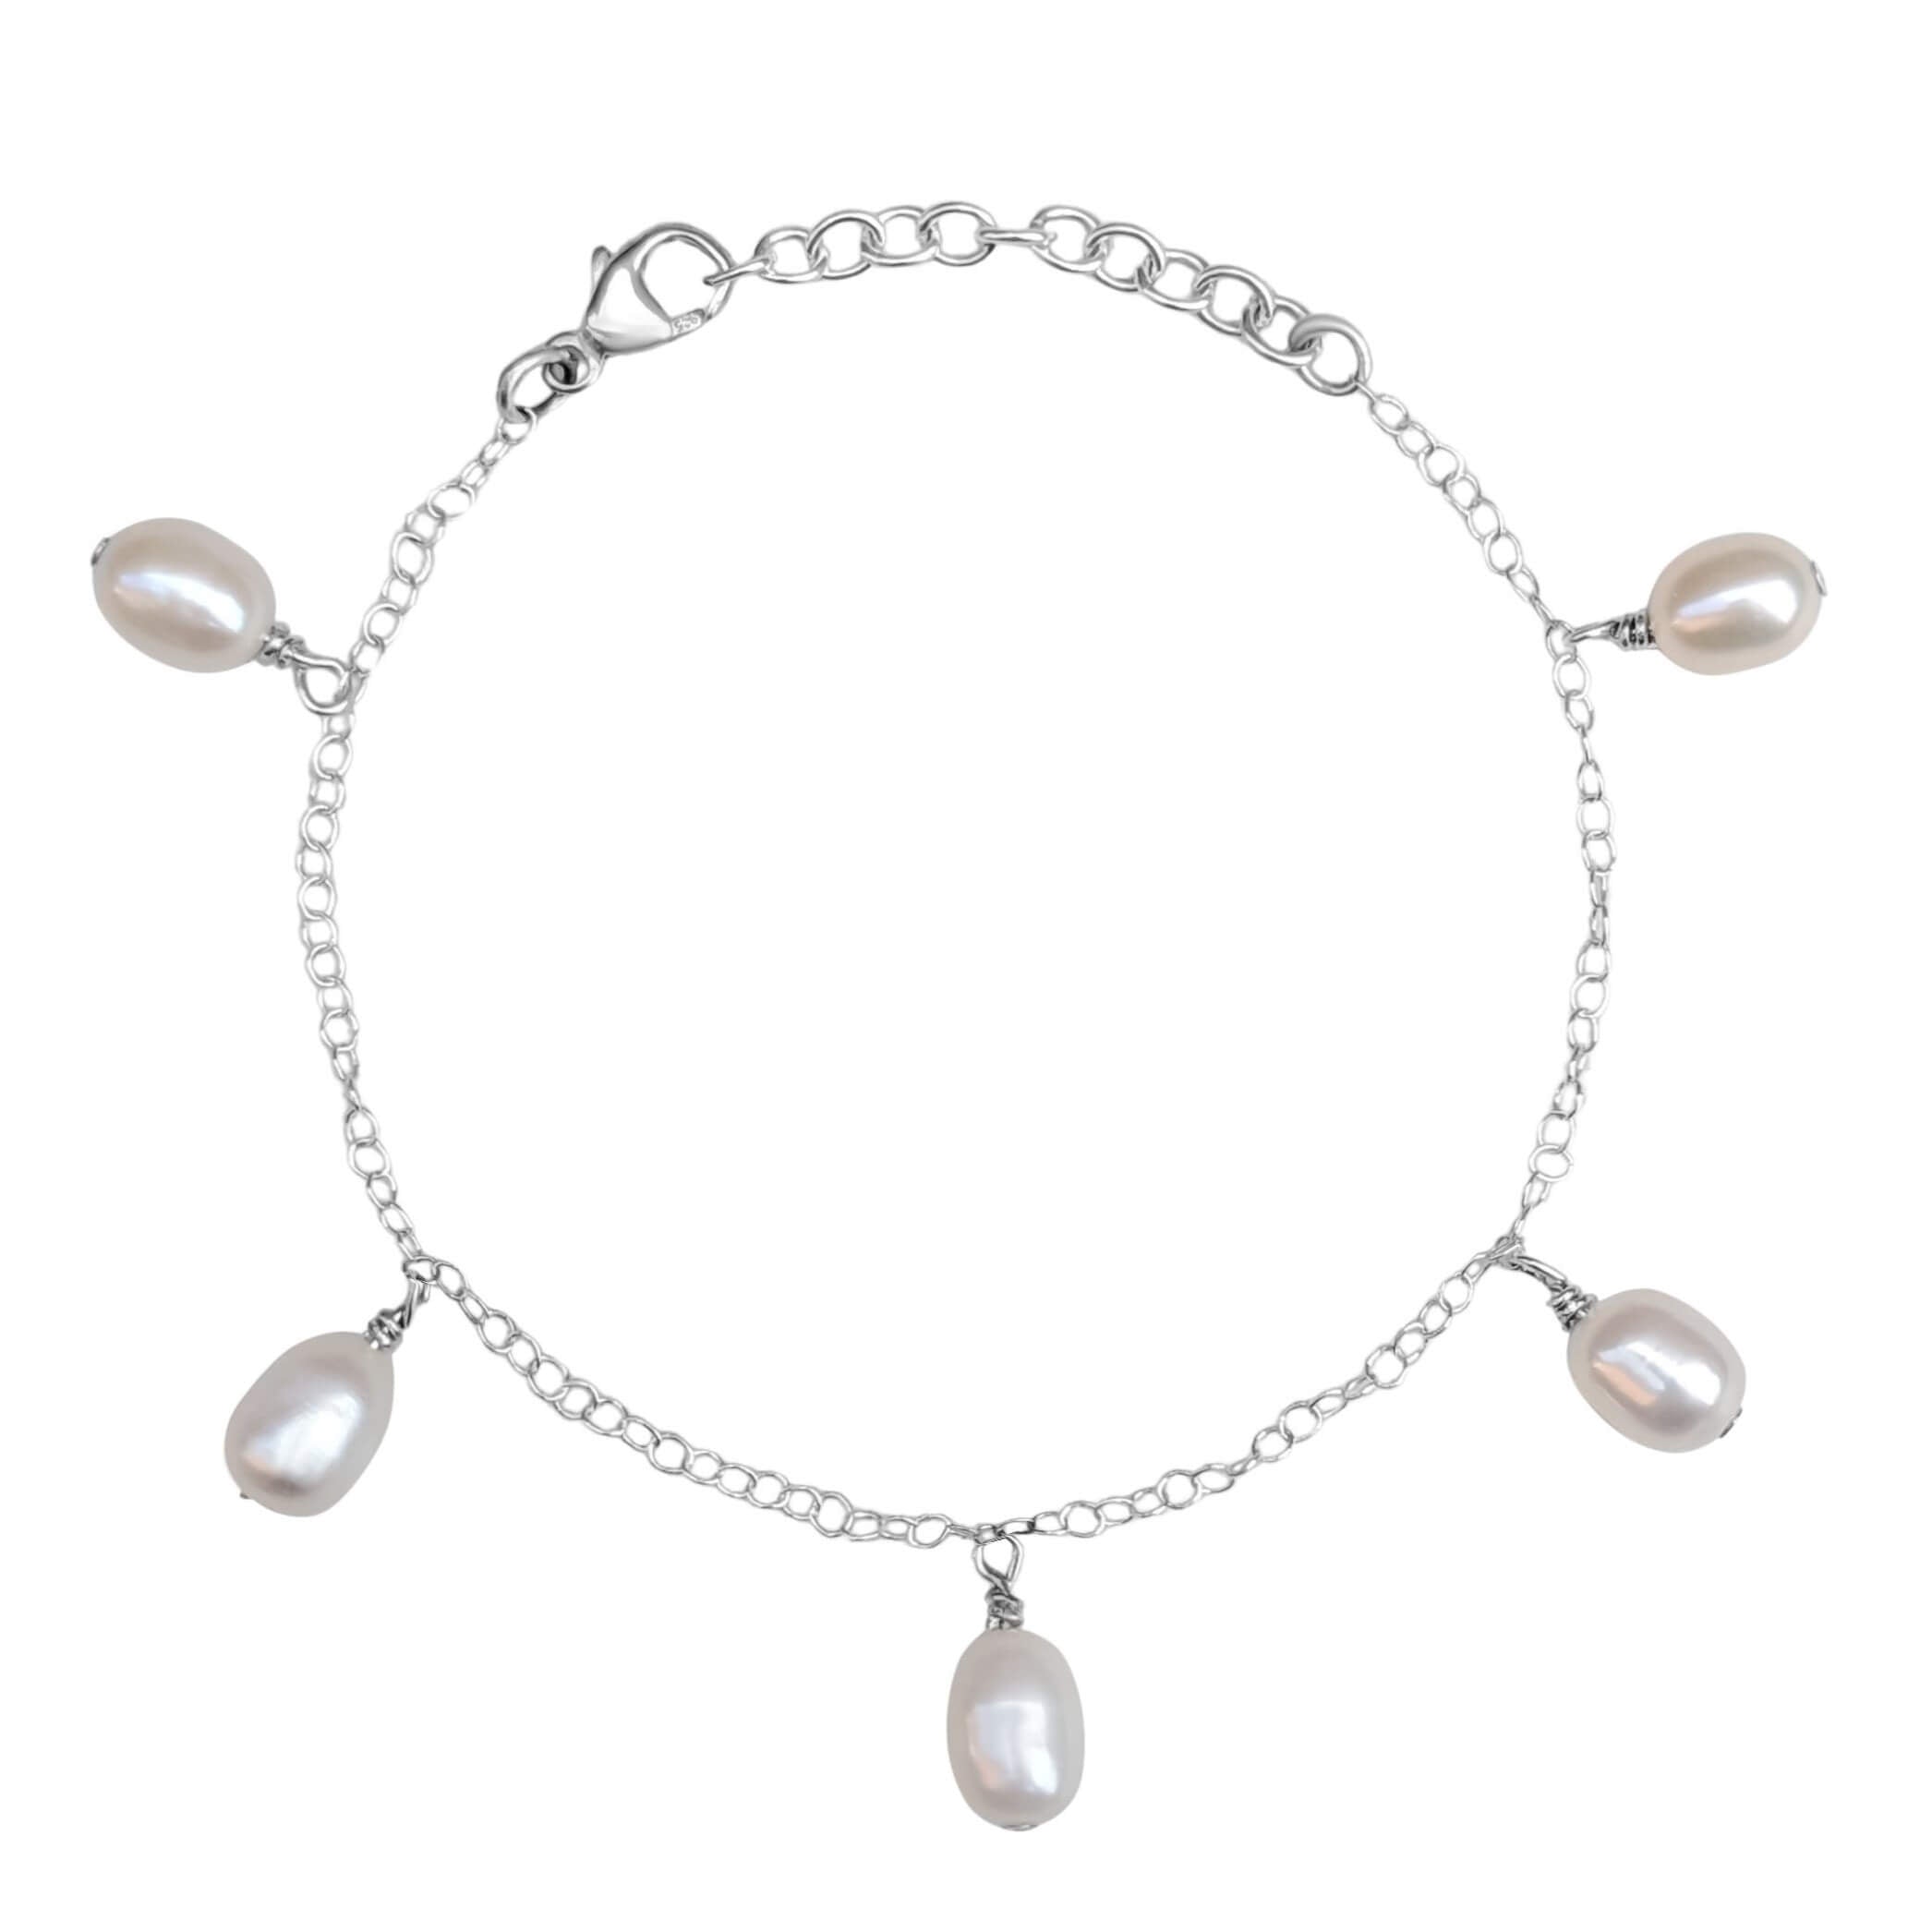 pearl drop charm bracelet in sterling silver on white background